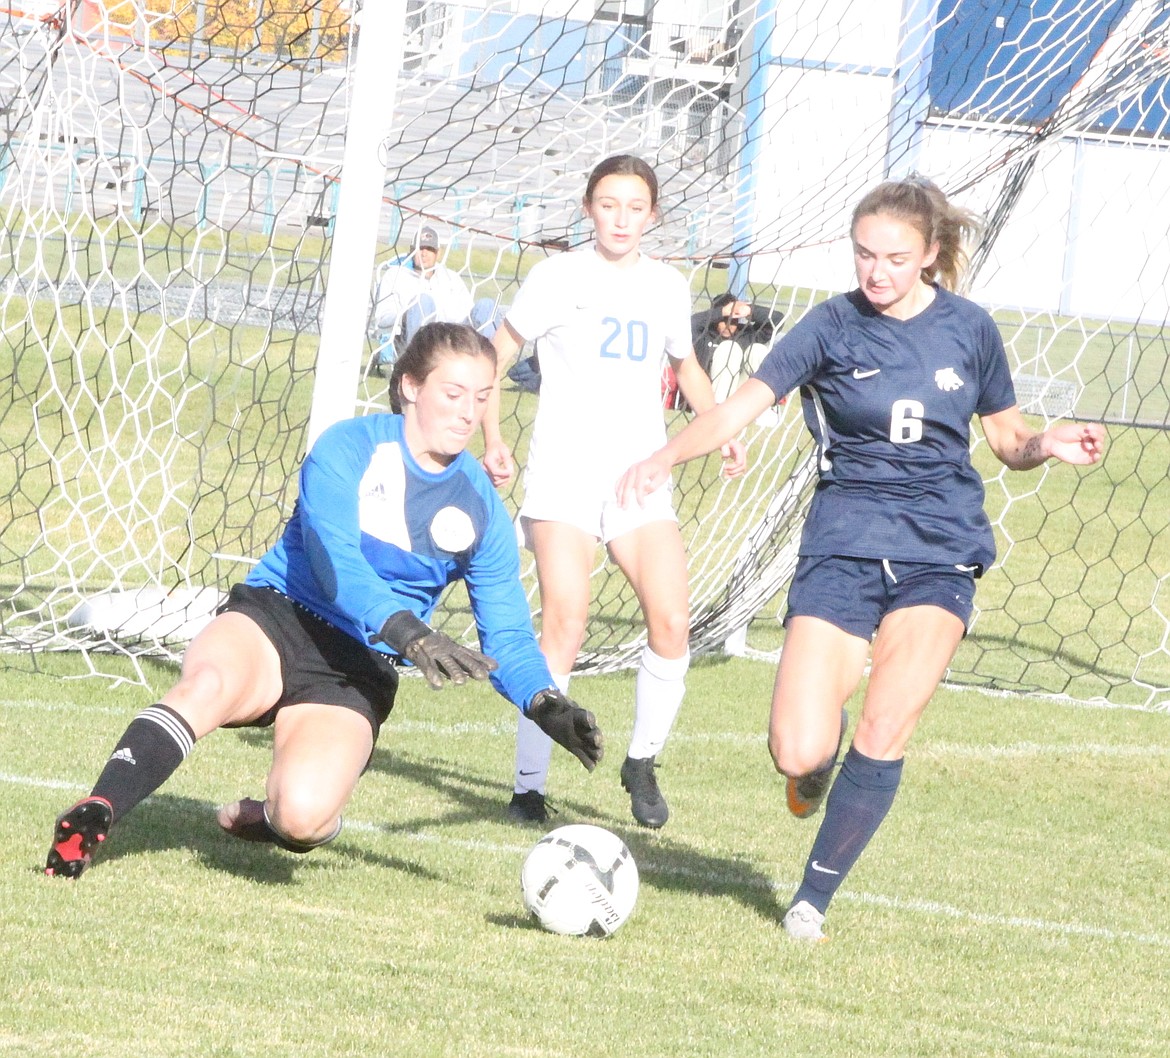 JASON ELLIOTT/Press
Coeur d'Alene junior goalkeeper Jay Ziegler dives on the ball for a save in front of Lake City junior defender Lucy Evans (6) and Coeur d'Alene junior forward Berkley Owens (20) during the 5A Region 1 girls soccer championship match on Tuesday.